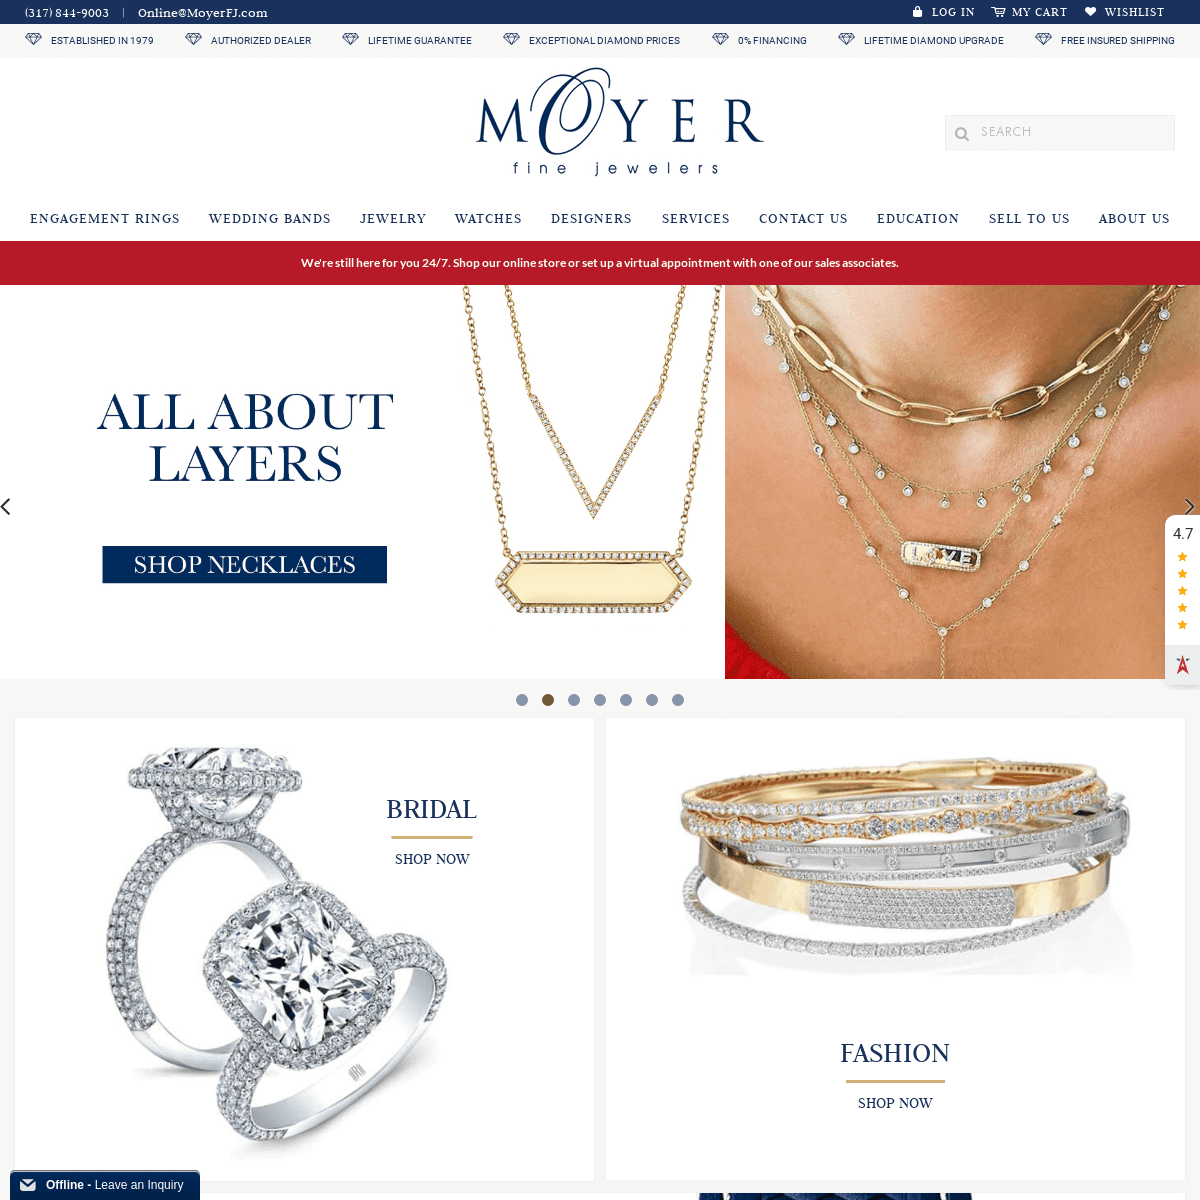 A complete backup of moyerfinejewelers.com